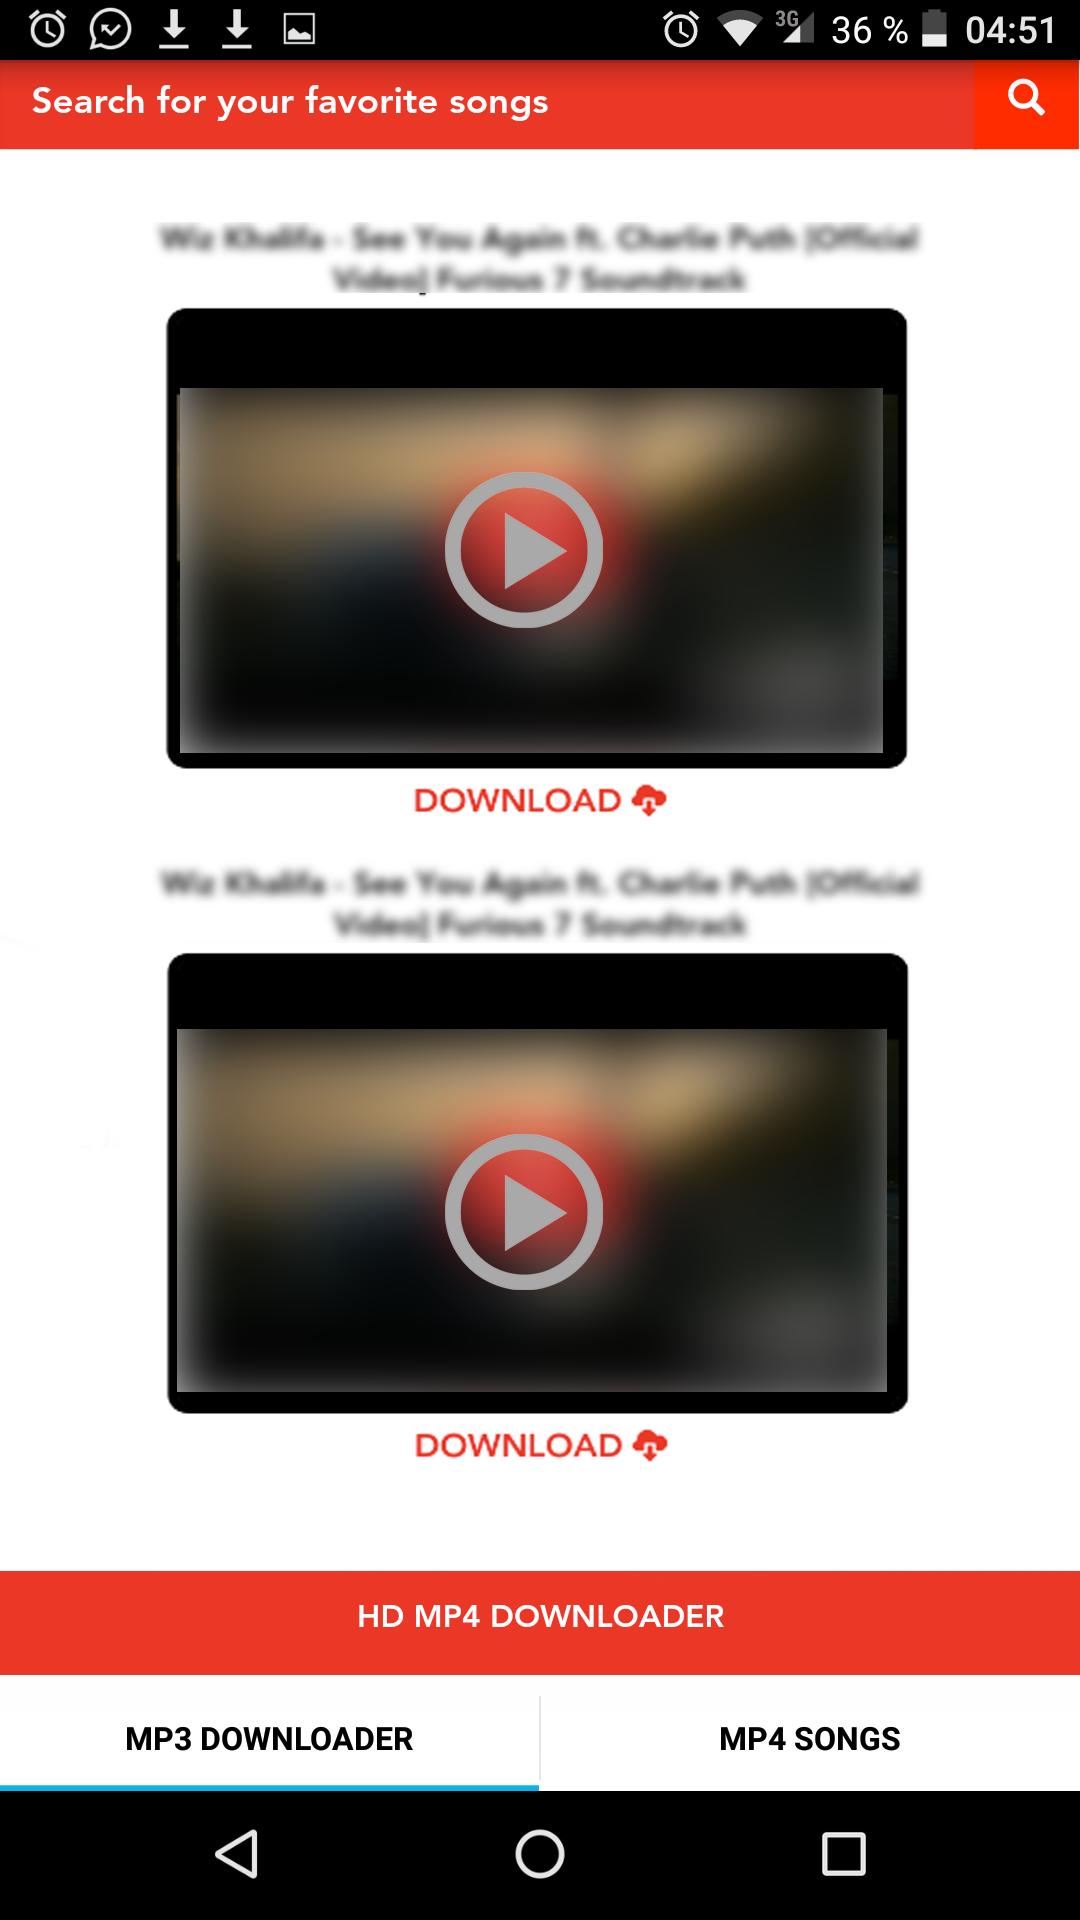 HD mp4 music downloader - download videos for free for Android - APK  Download